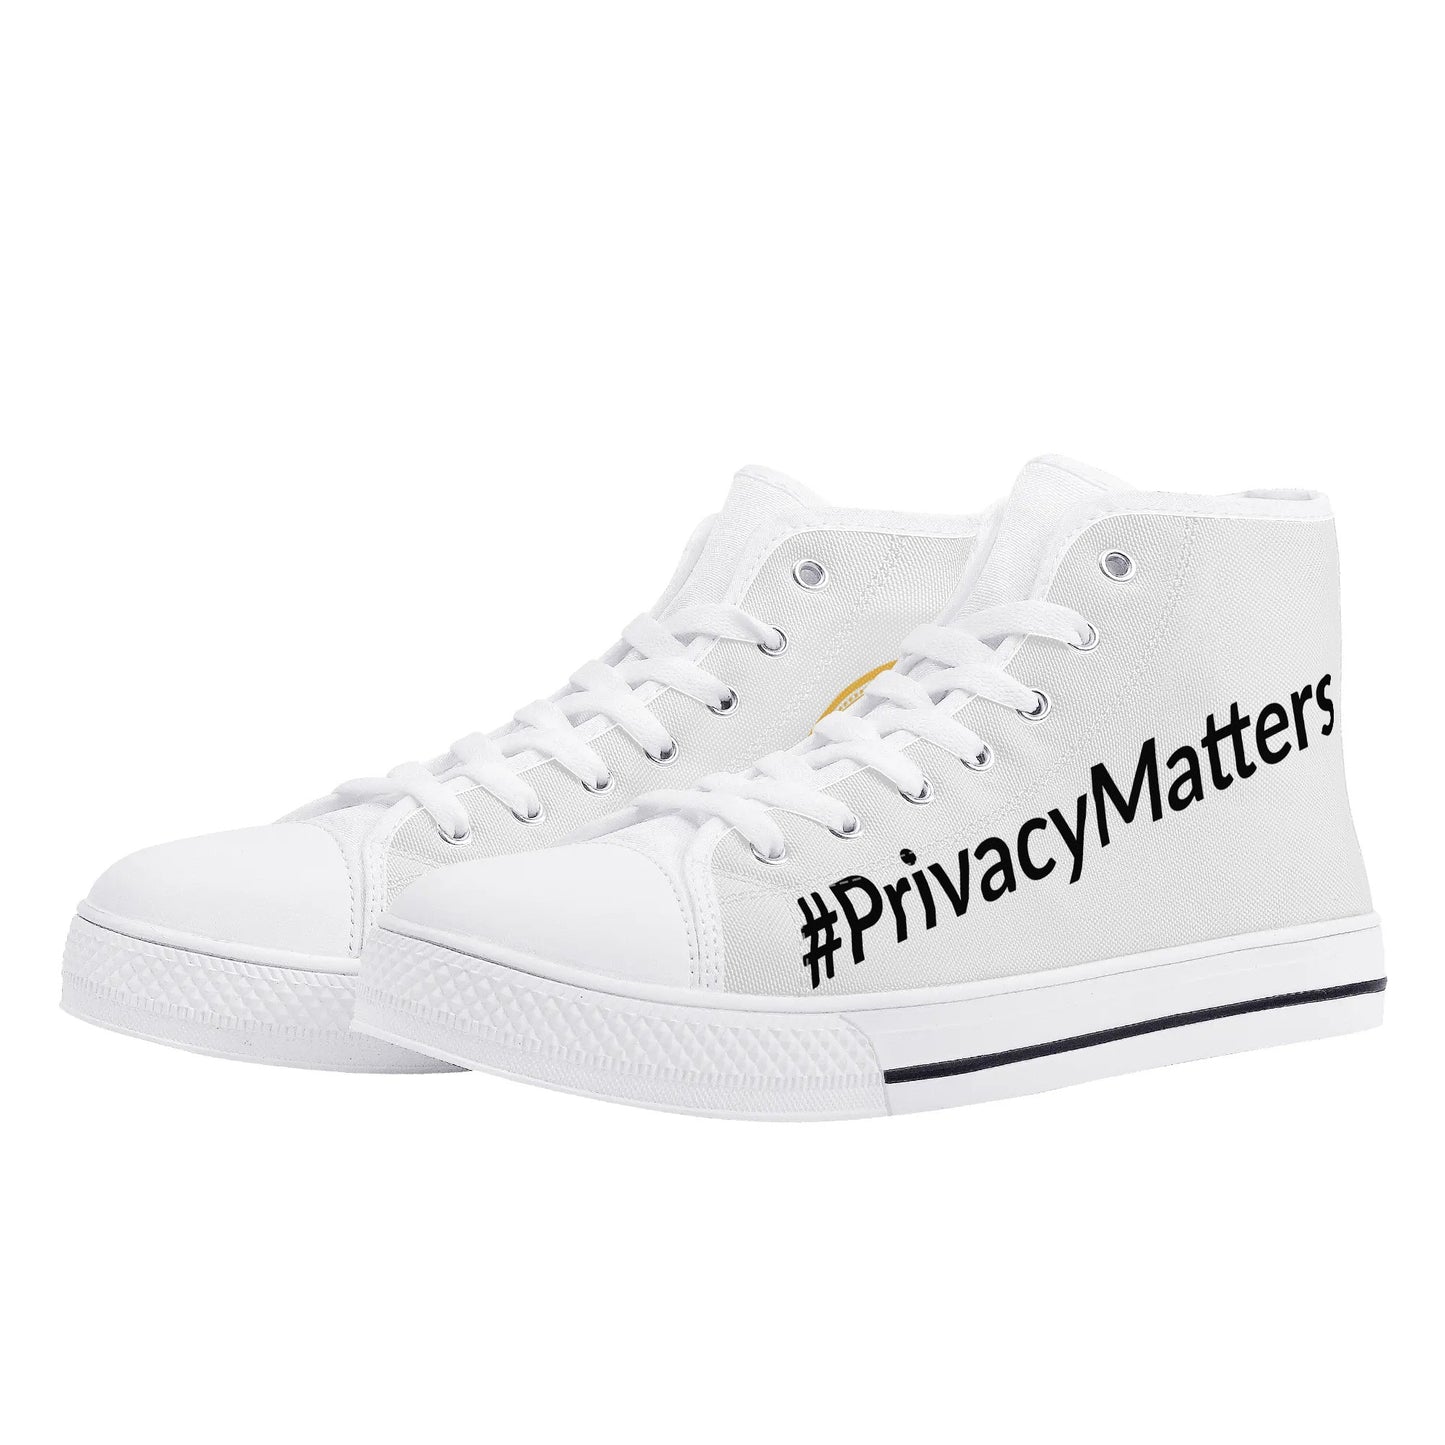 #PrivacyMatters High Top Canvas Shoes - Golden